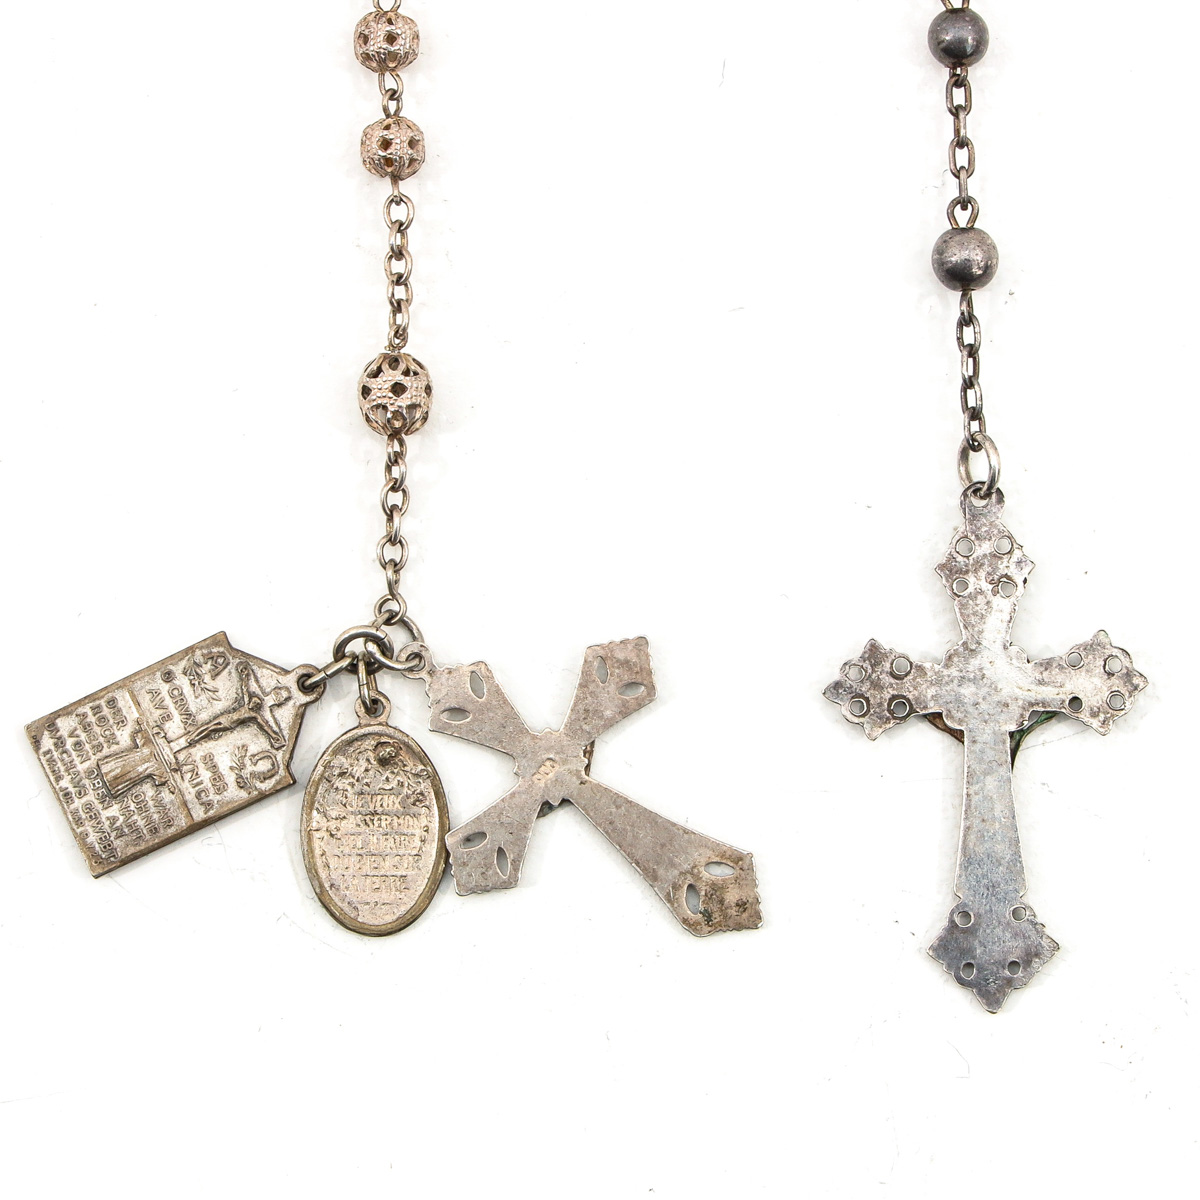 A Collection of 5 Silver Rosaries - Image 8 of 8